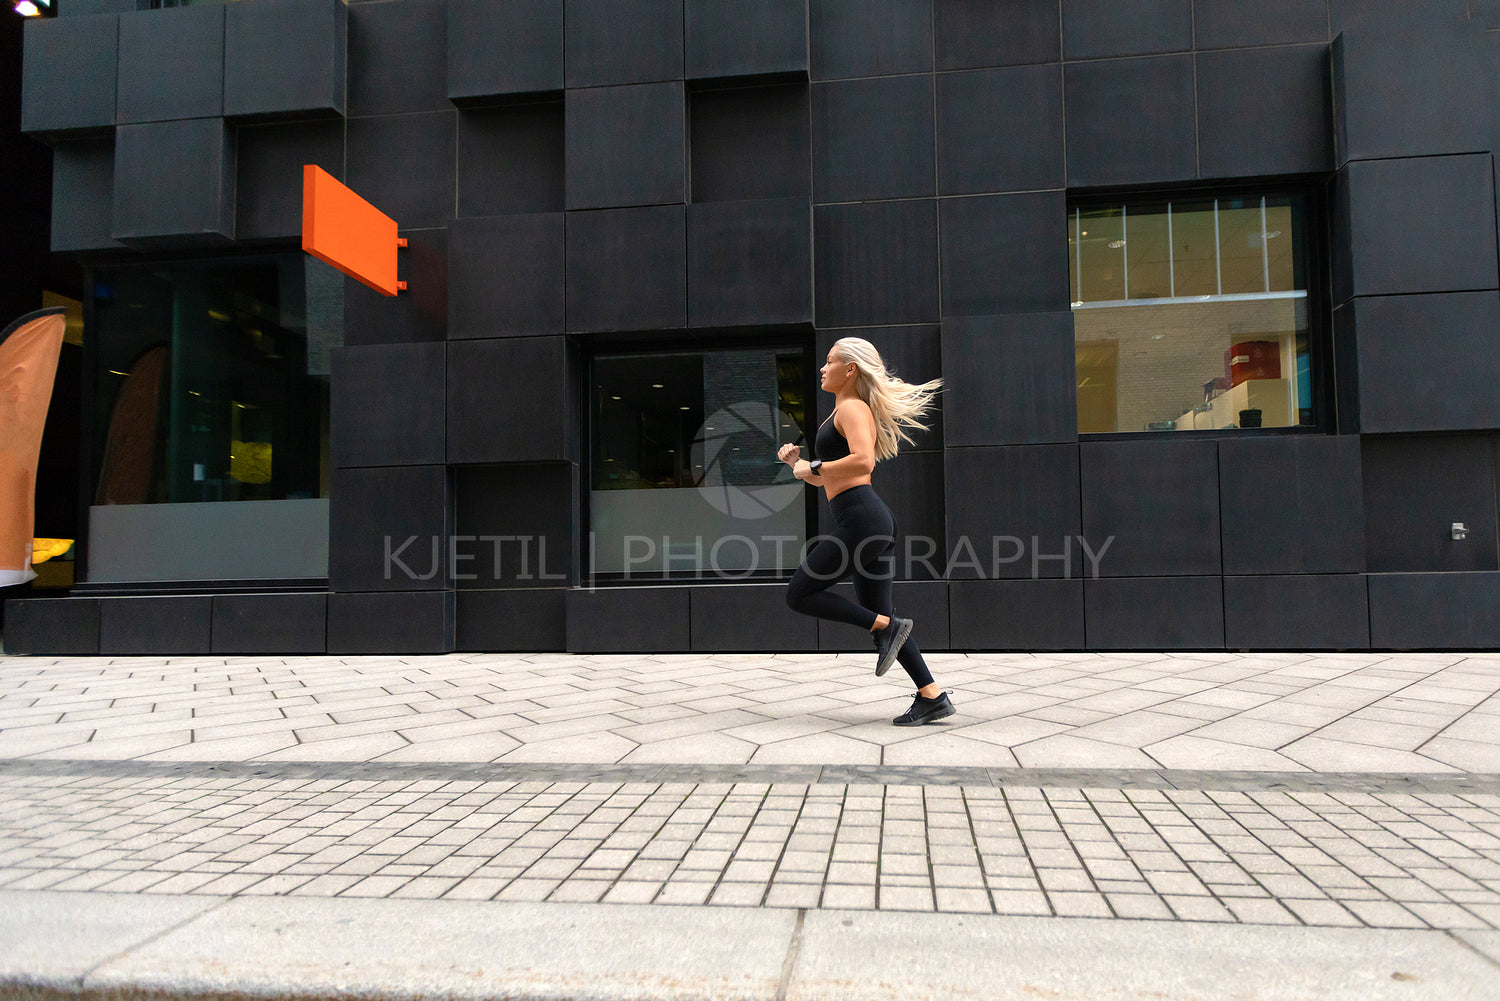 Side view of sporty young woman runner in minimalist urban environment